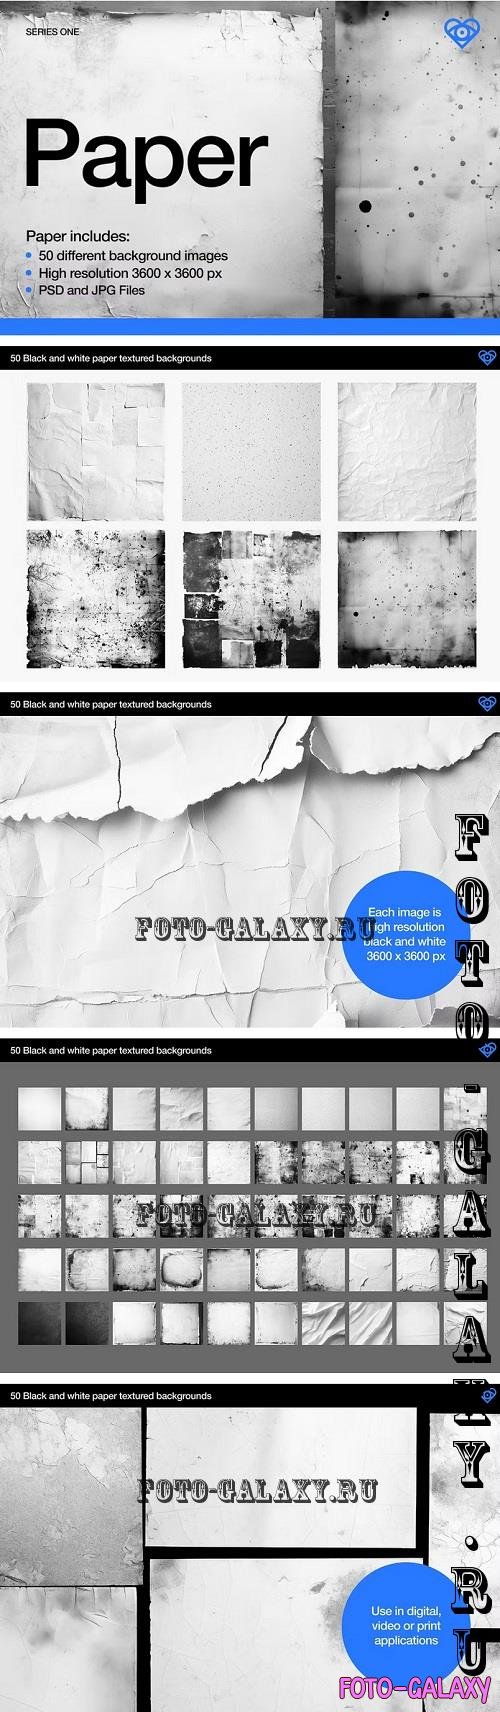 Paper - 50 Black & White Backgrounds - 92088751